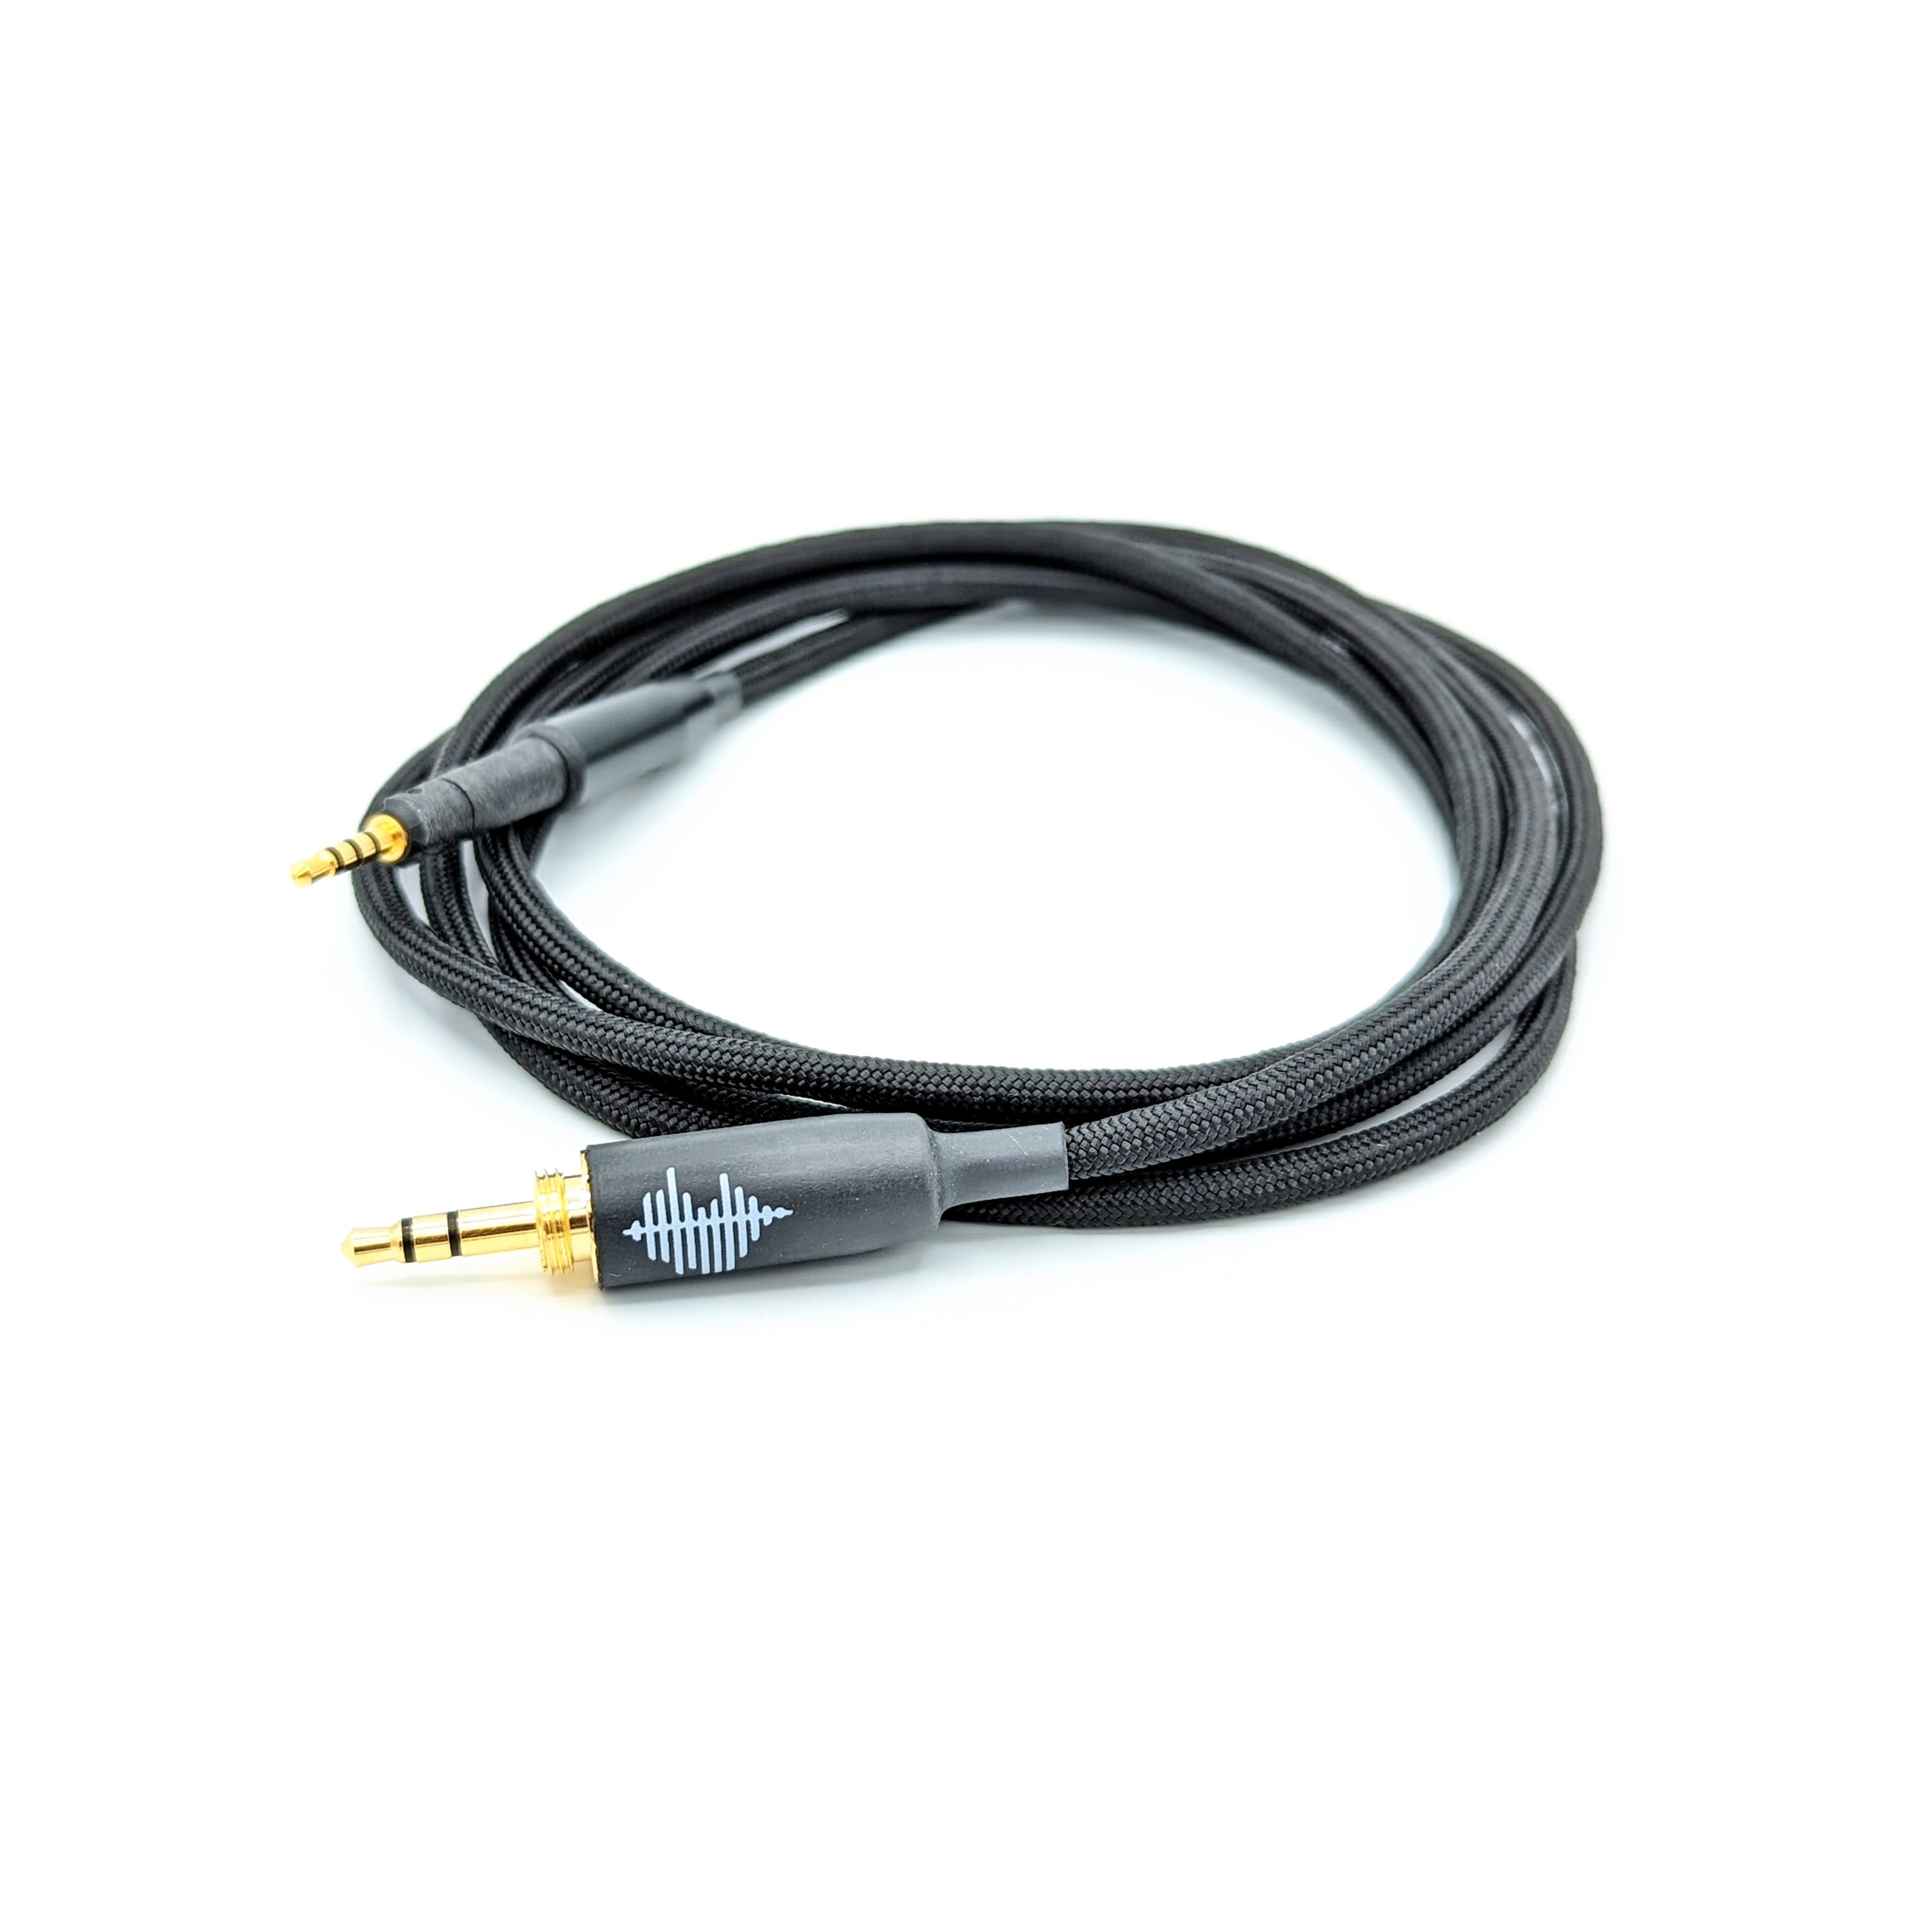 Locking 2.5mm Cable for Neumann NDH20 / NDH30 – Hart Audio Cables